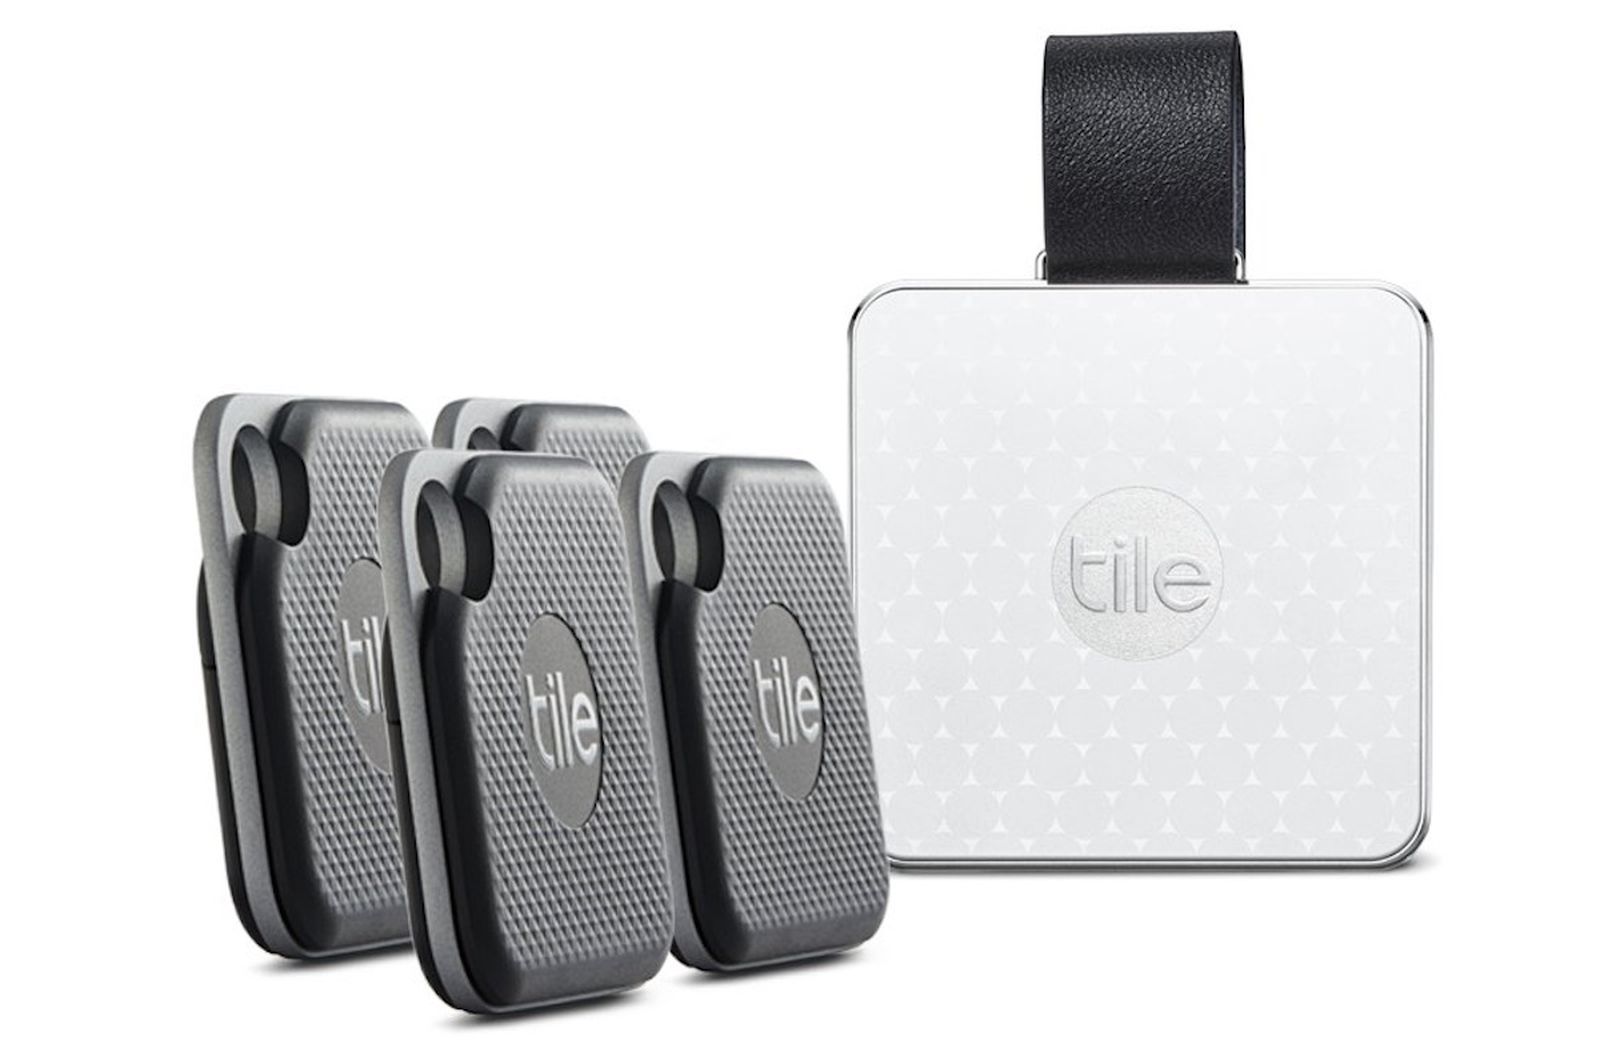 Tile unhappy with Apple AirTag launch, “skeptical” about fair competition and plans to fight Congress